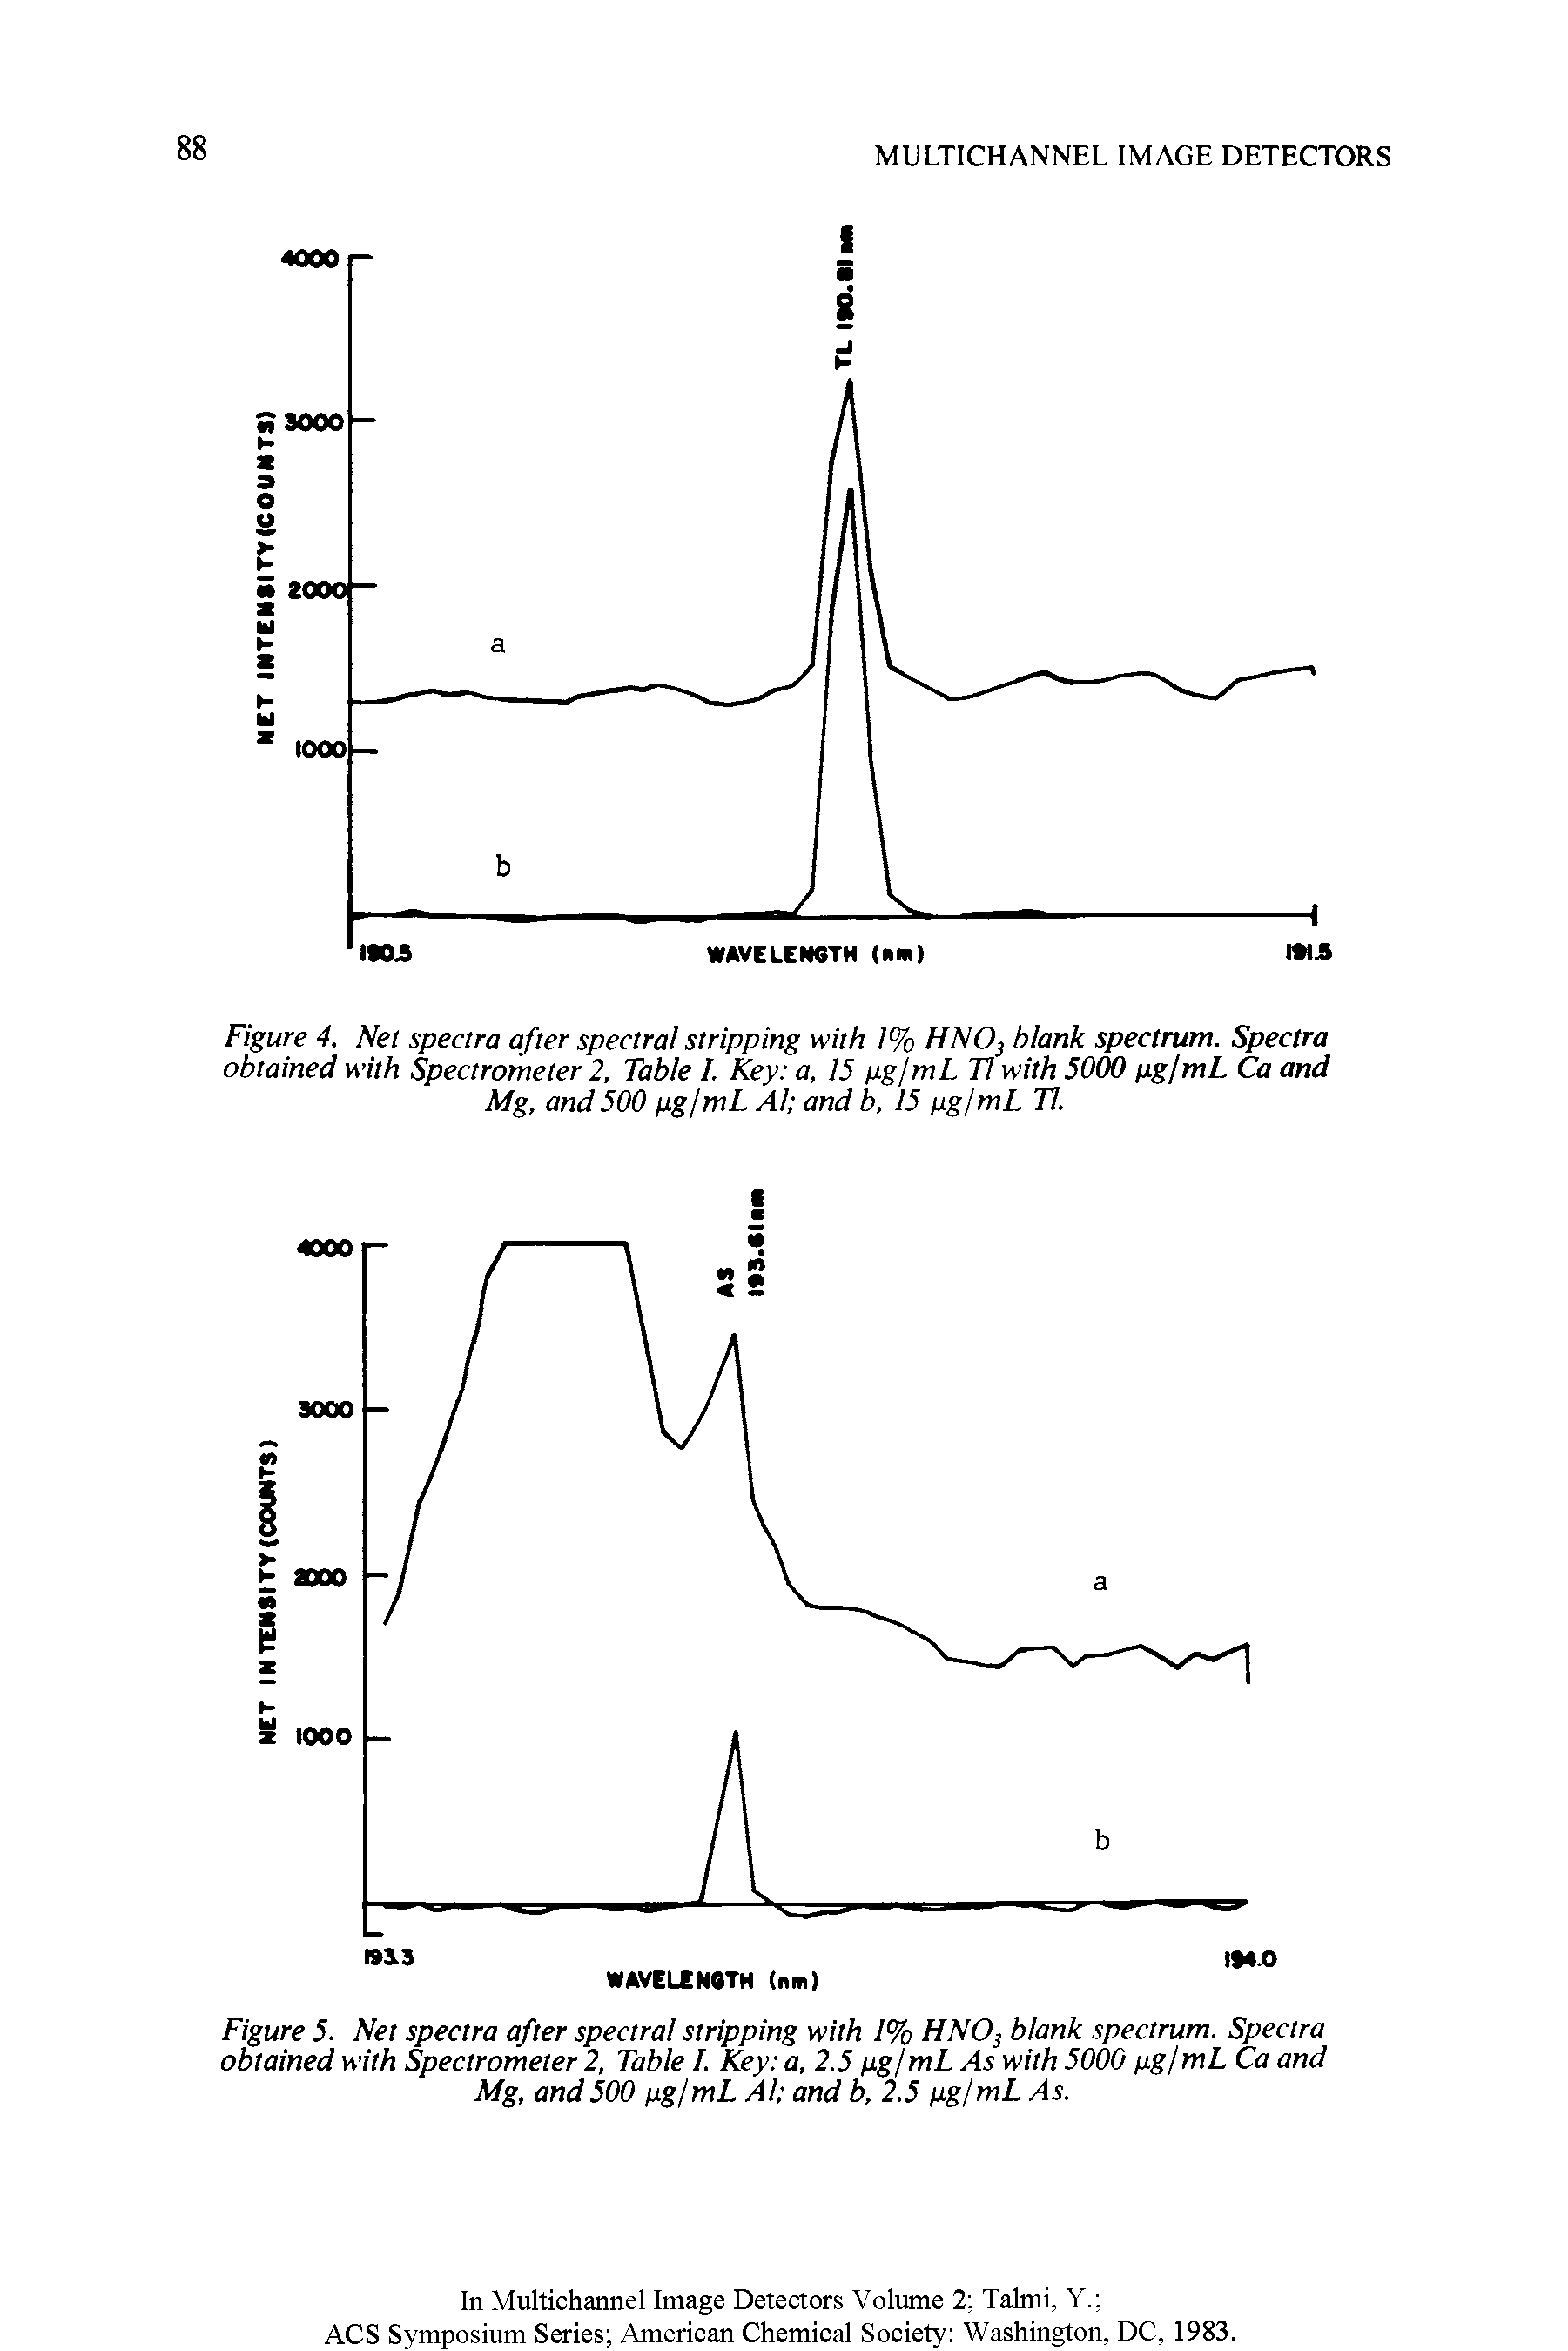 Figure 4. Net spectra after spectral stripping with 1% HN03 blank spectrum. Spectra obtained with Spectrometer 2, Table I. Key a, 15 pgjmL 77 with 5000 pg/mL Ca and Mg, and 500 pgjmL Al and b, 15 pg/mL H.